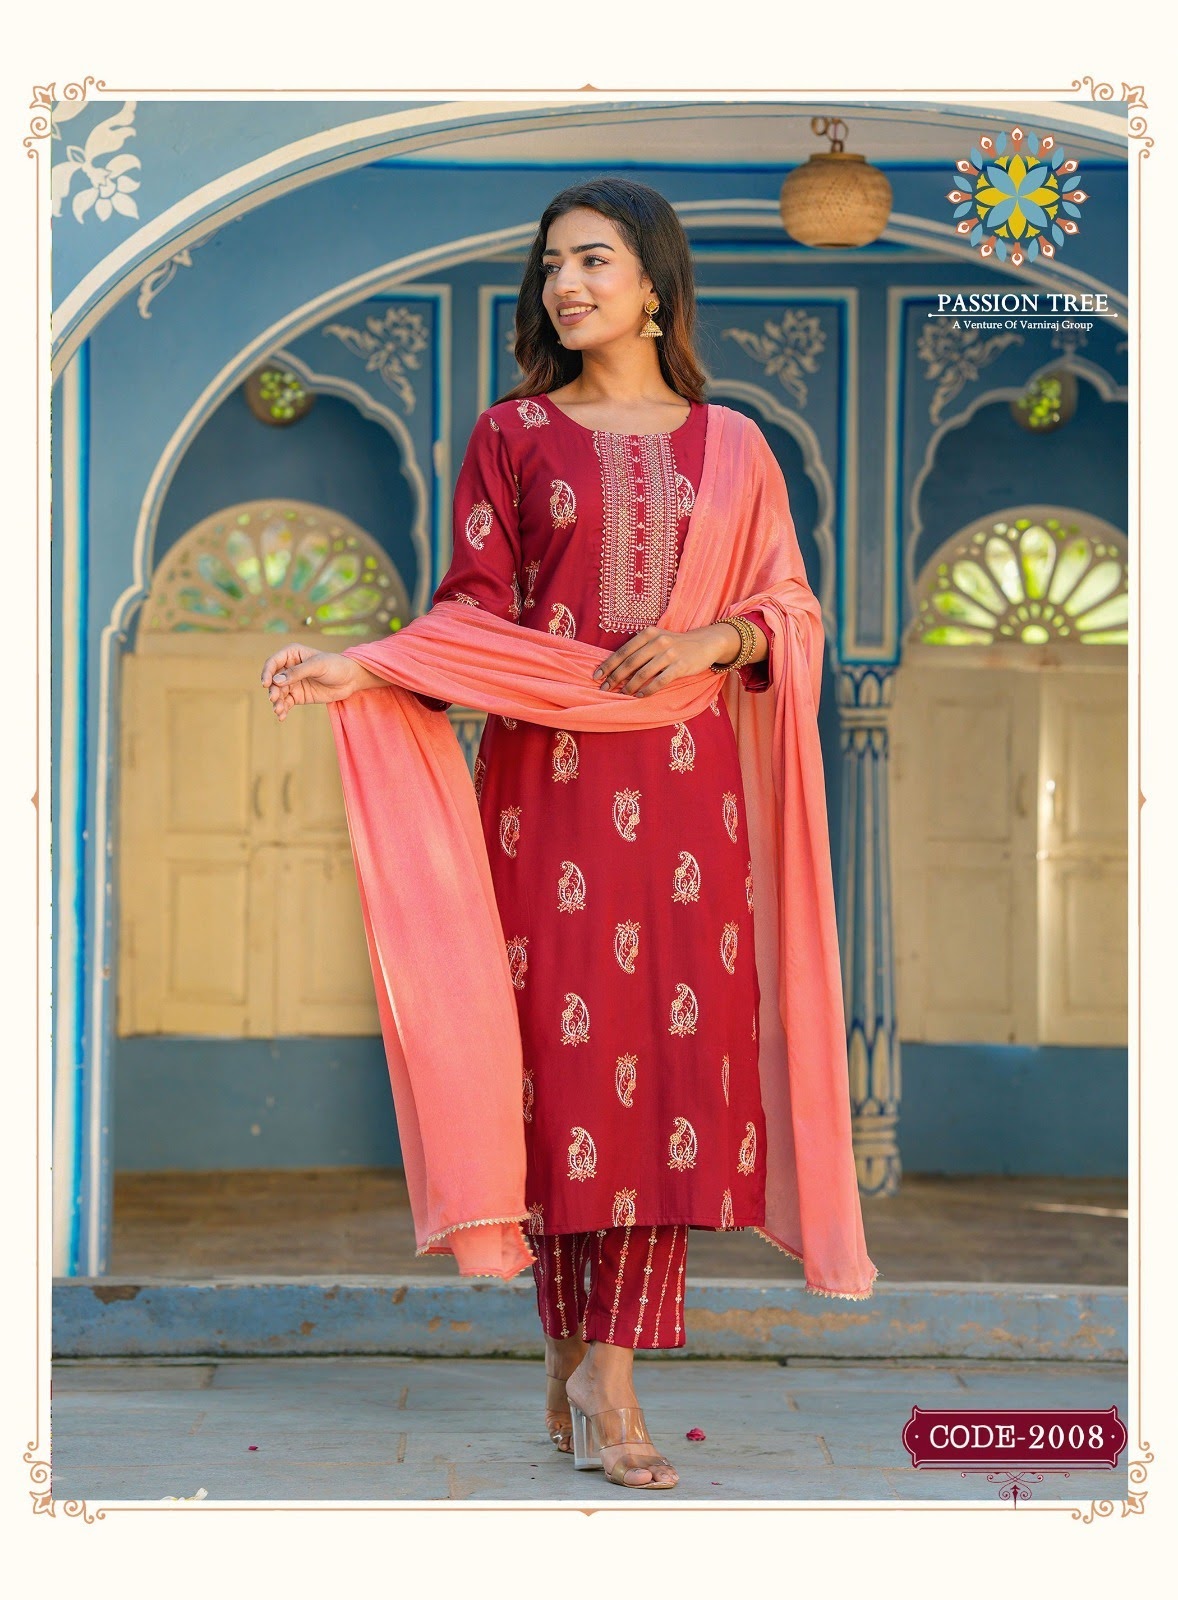 Harvi Vol 2 Passion Tree Rayon Readymade Pant Style Suits